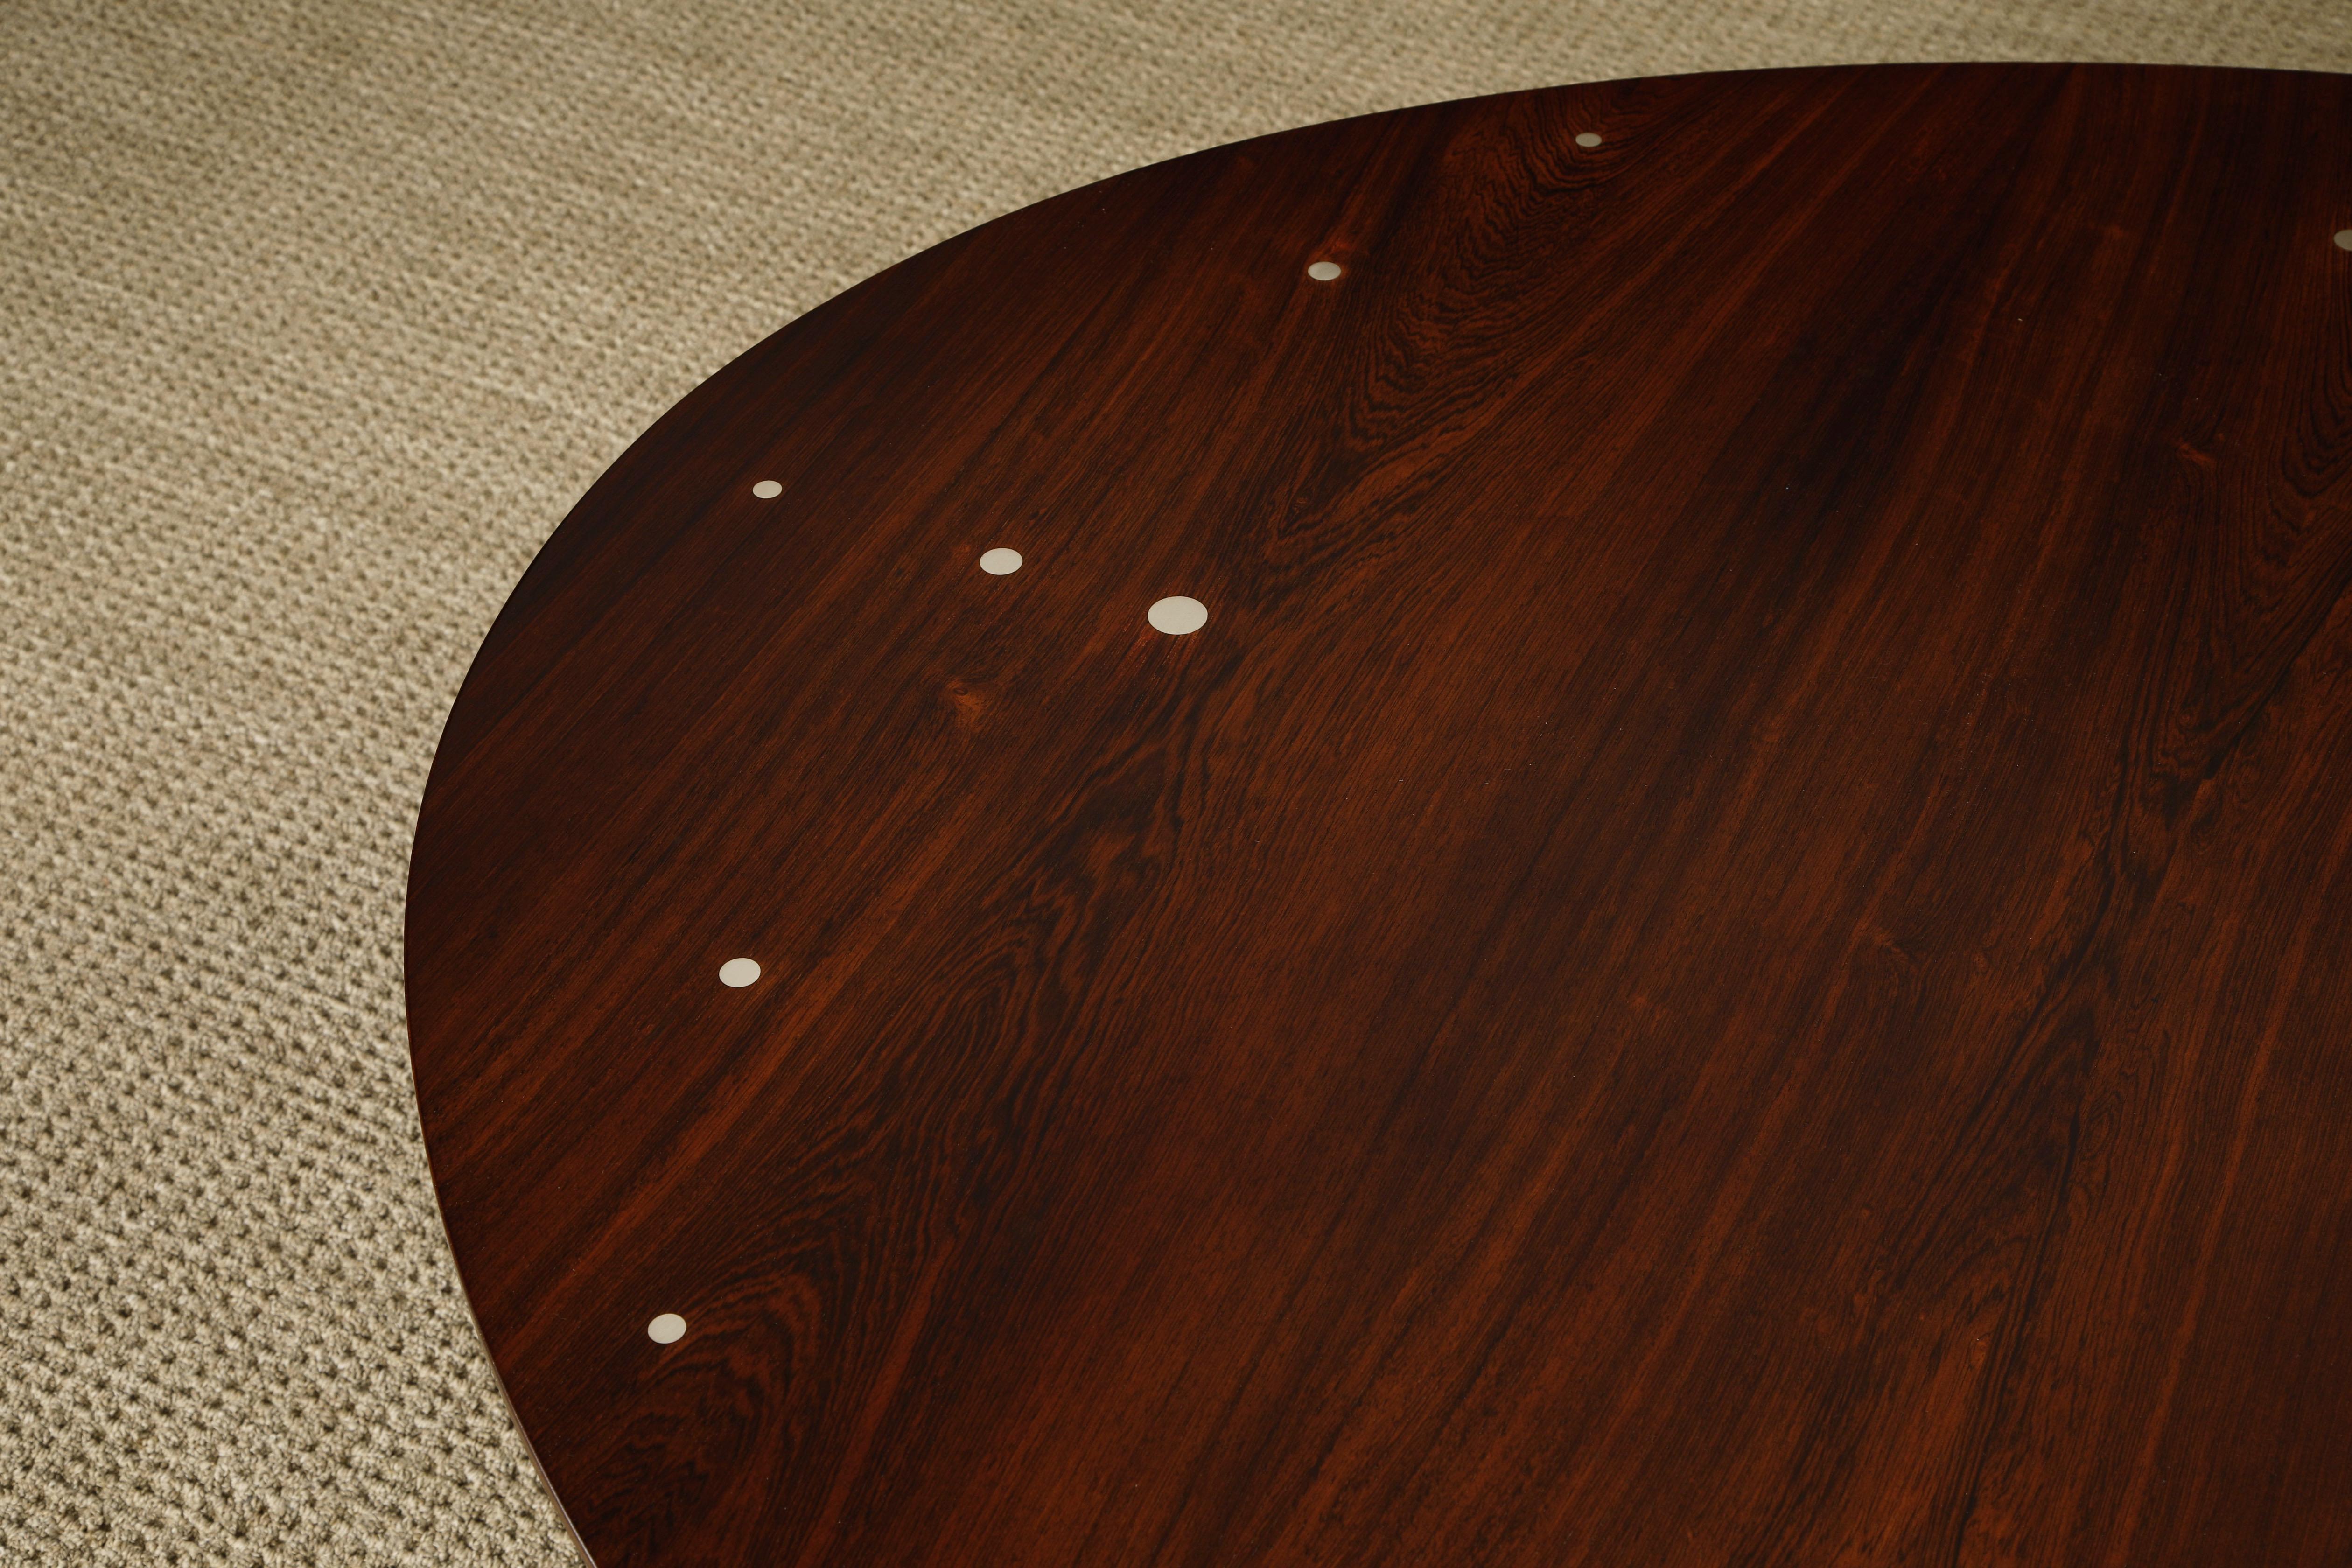 Finn Juhl 'Judas' Rosewood and Sterling Silver Dining Table, c 1950s, Signed For Sale 9